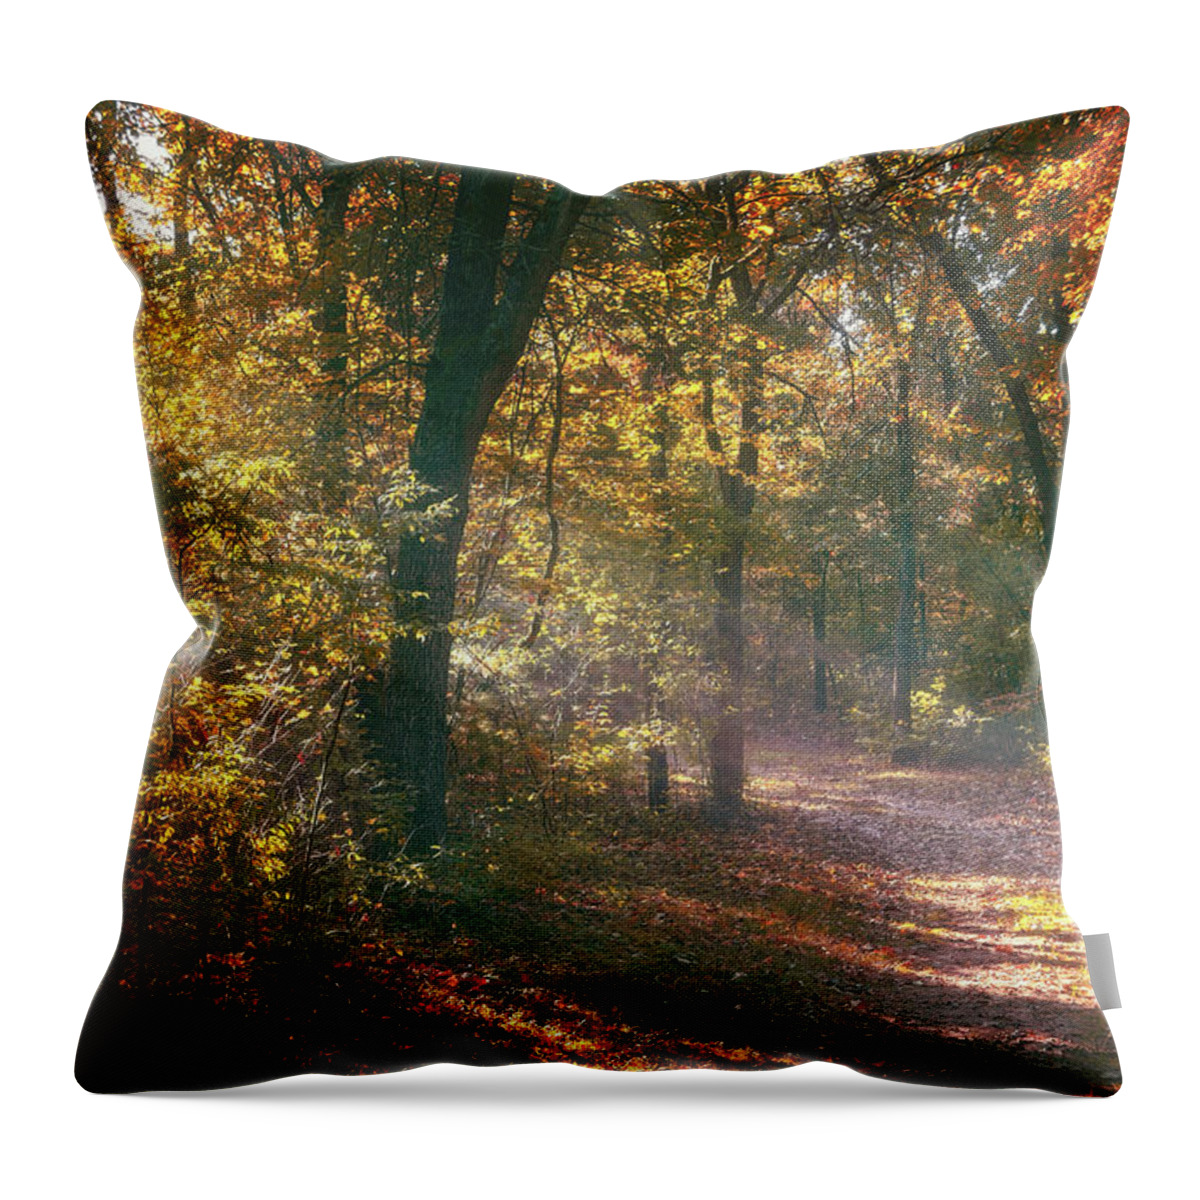 Autumn Throw Pillow featuring the photograph Autumn Path by Scott Norris